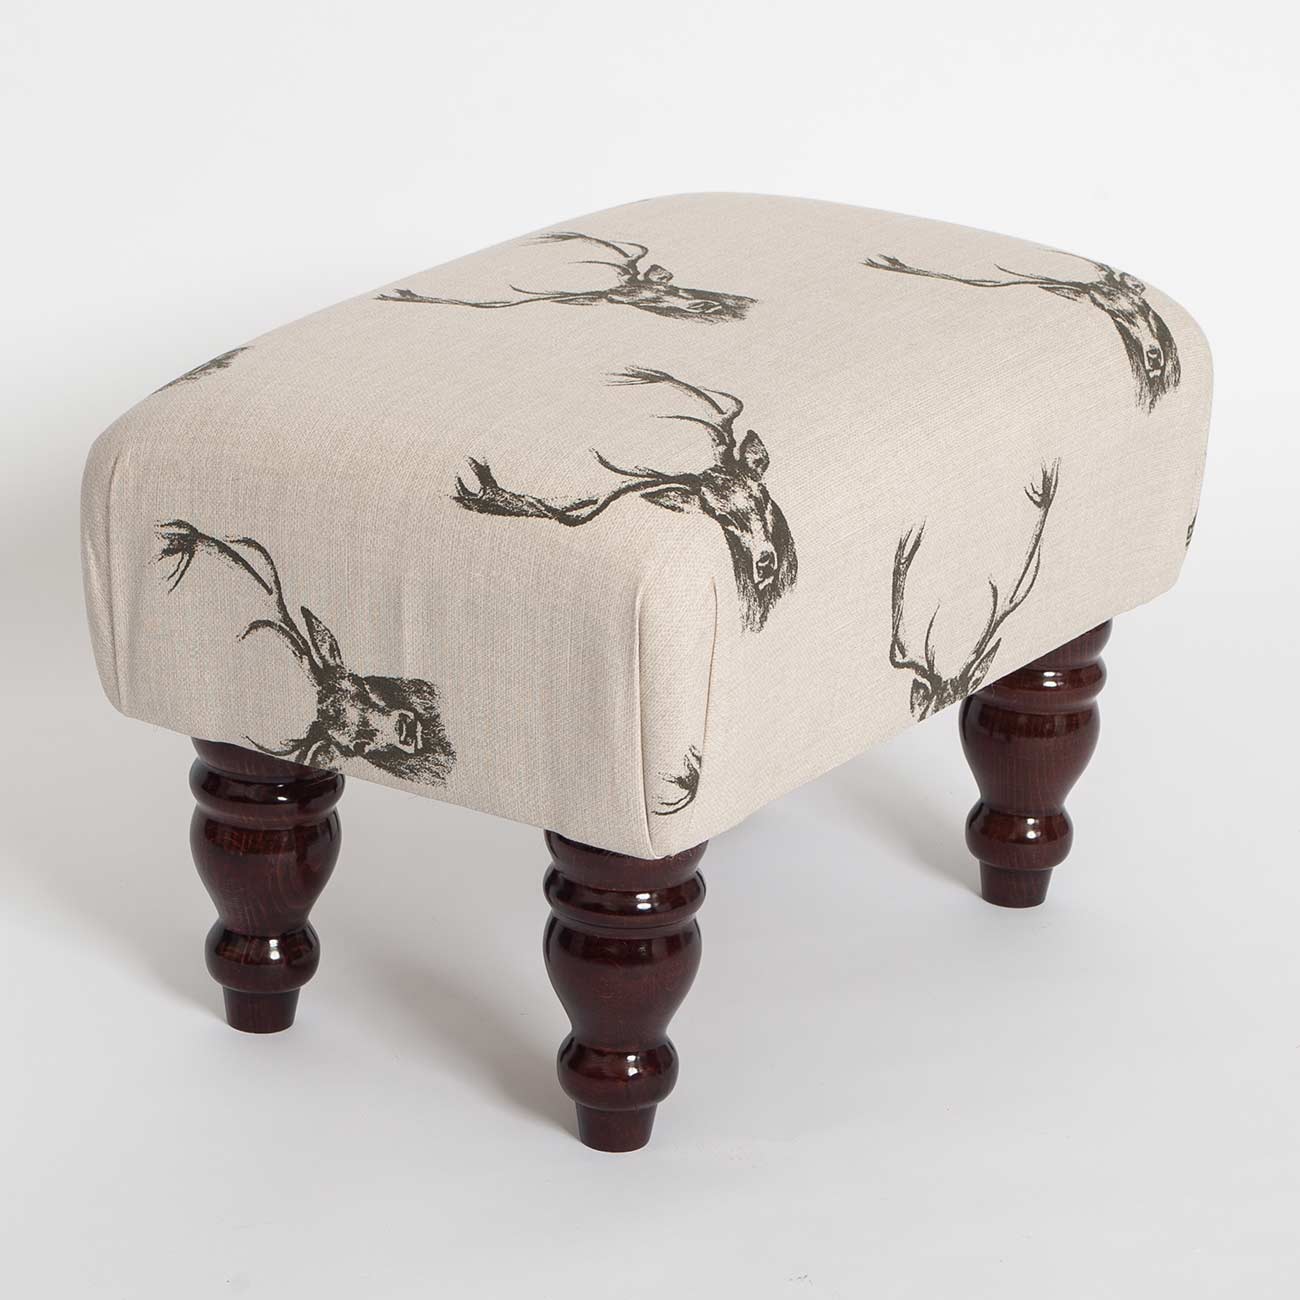 stag-head-footstool9 fabric from JLP